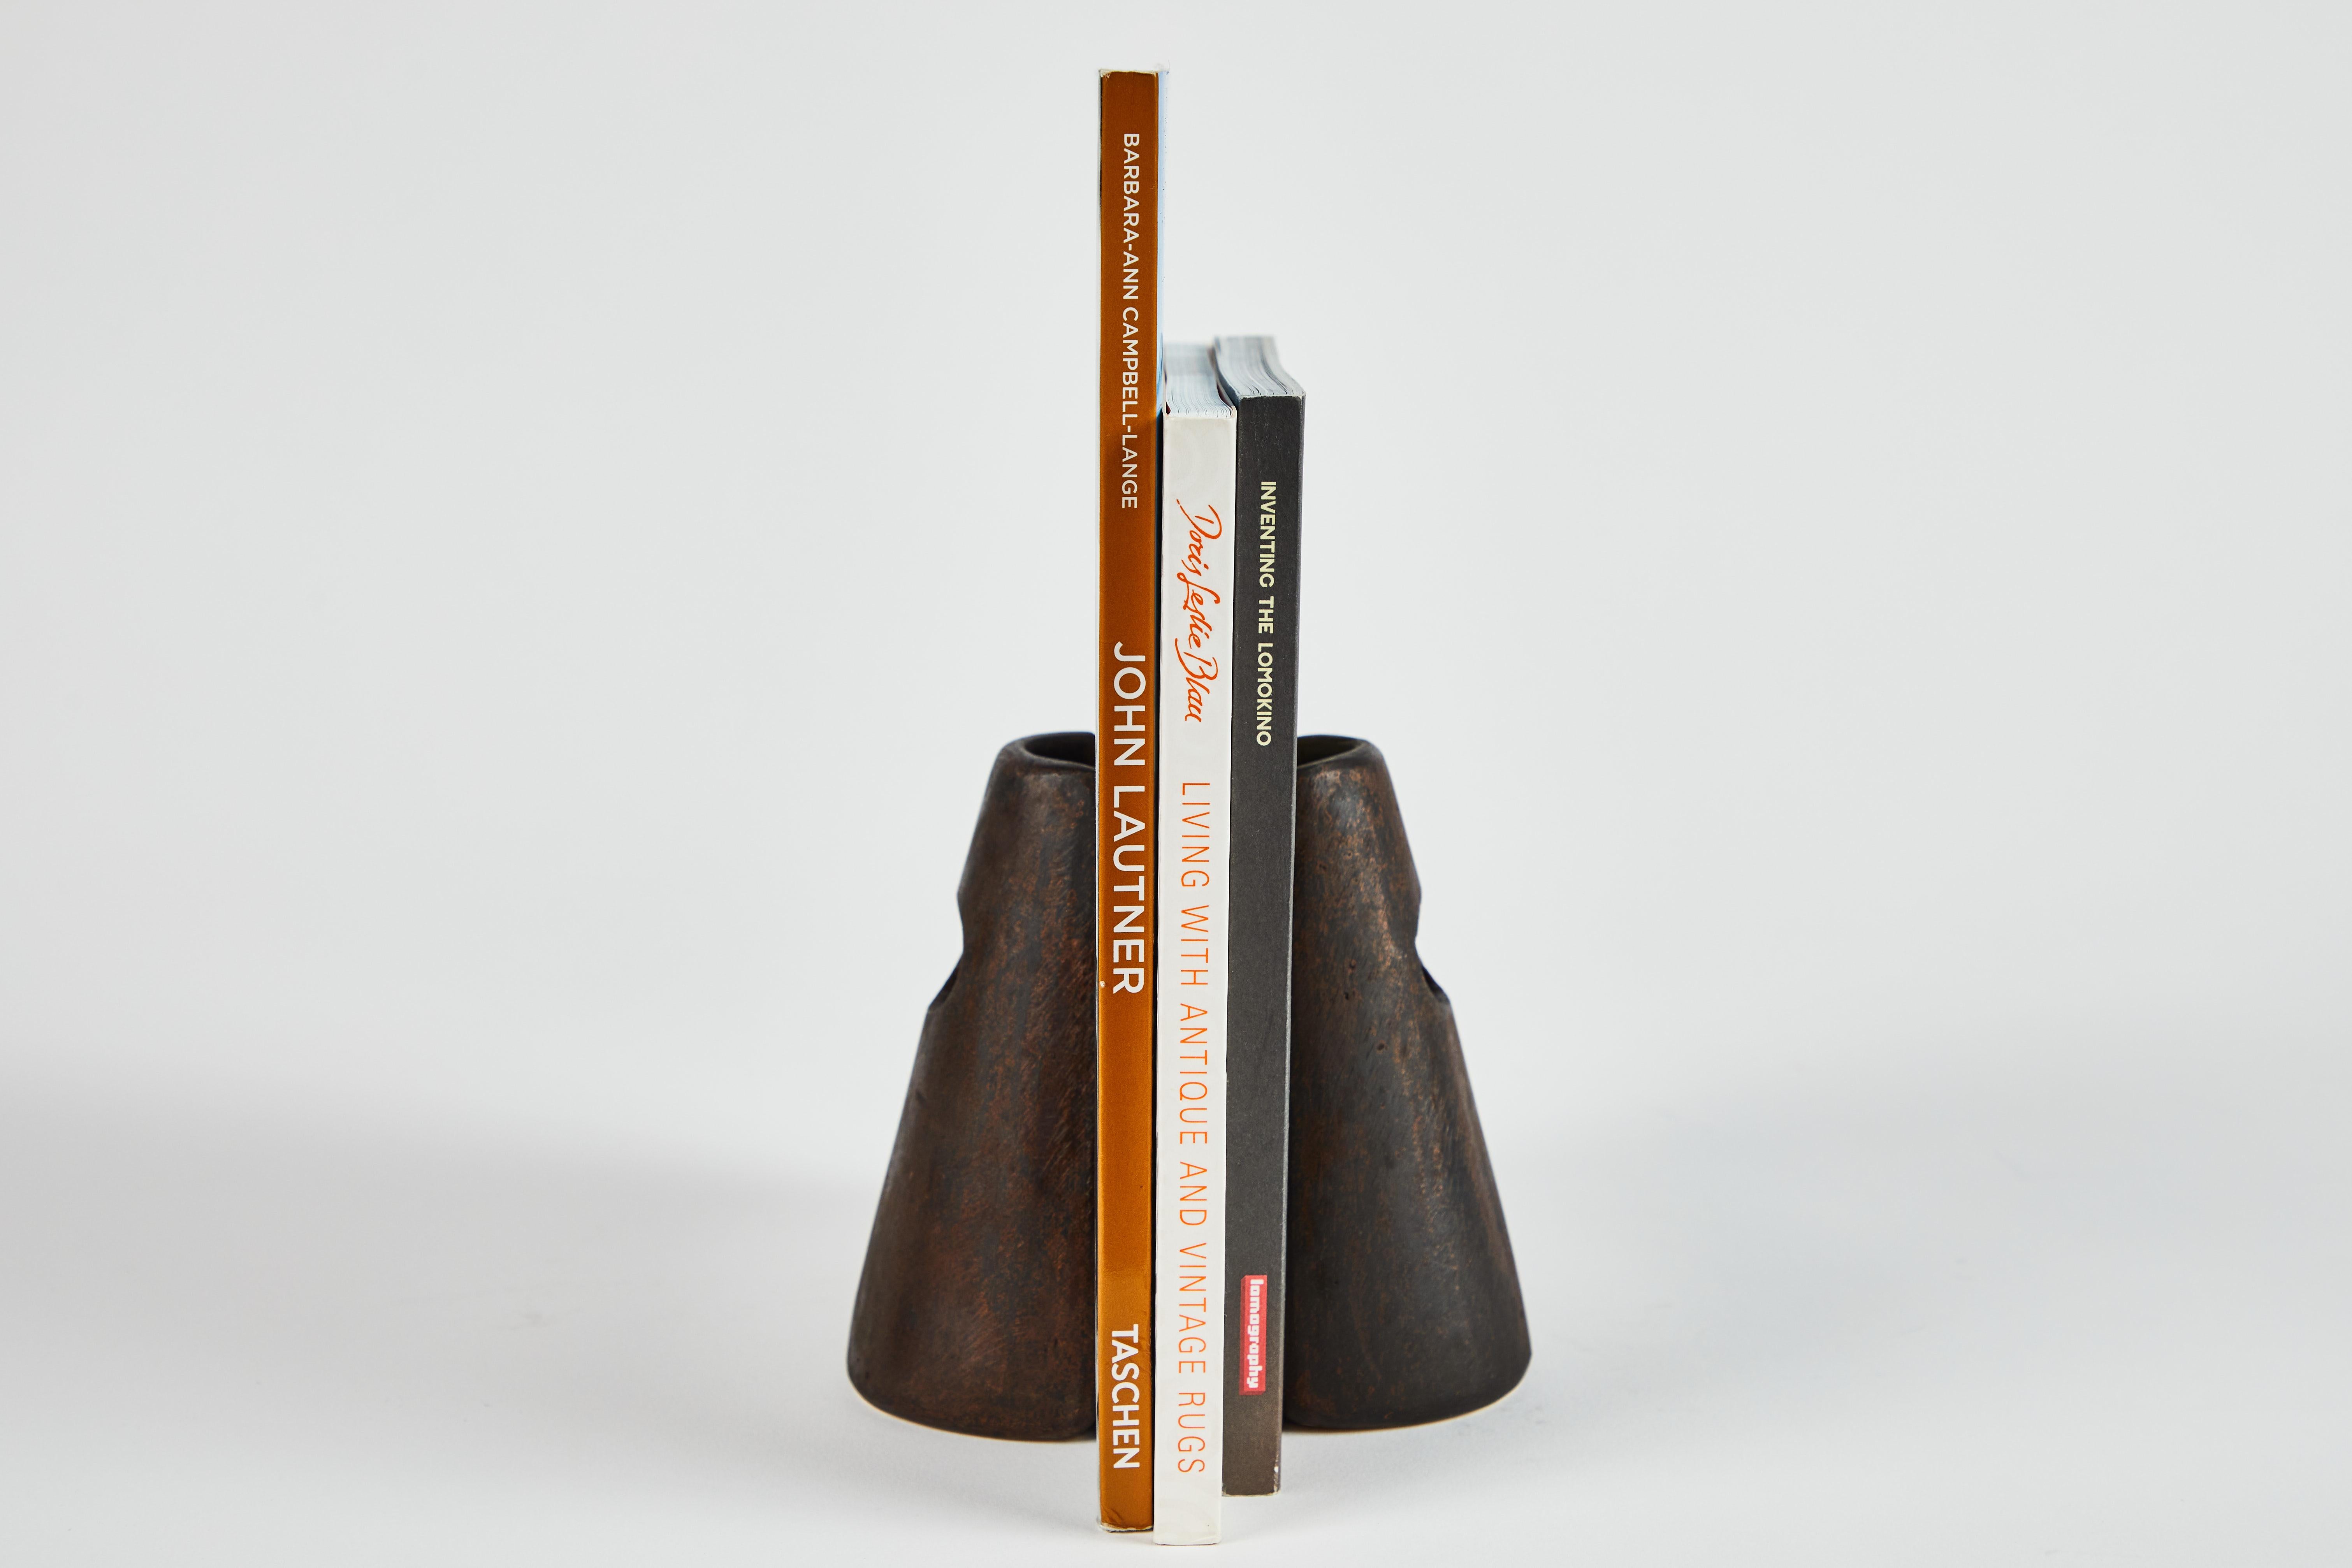 Pair of Carl Auböck Model #4842 patinated brass bookends. Designed in the 1950s, this incredibly refined and sculptural pair of bookends are executed in patinated brass. 

Price is for the pair. Two in stock ready to ship. Available in unlimited